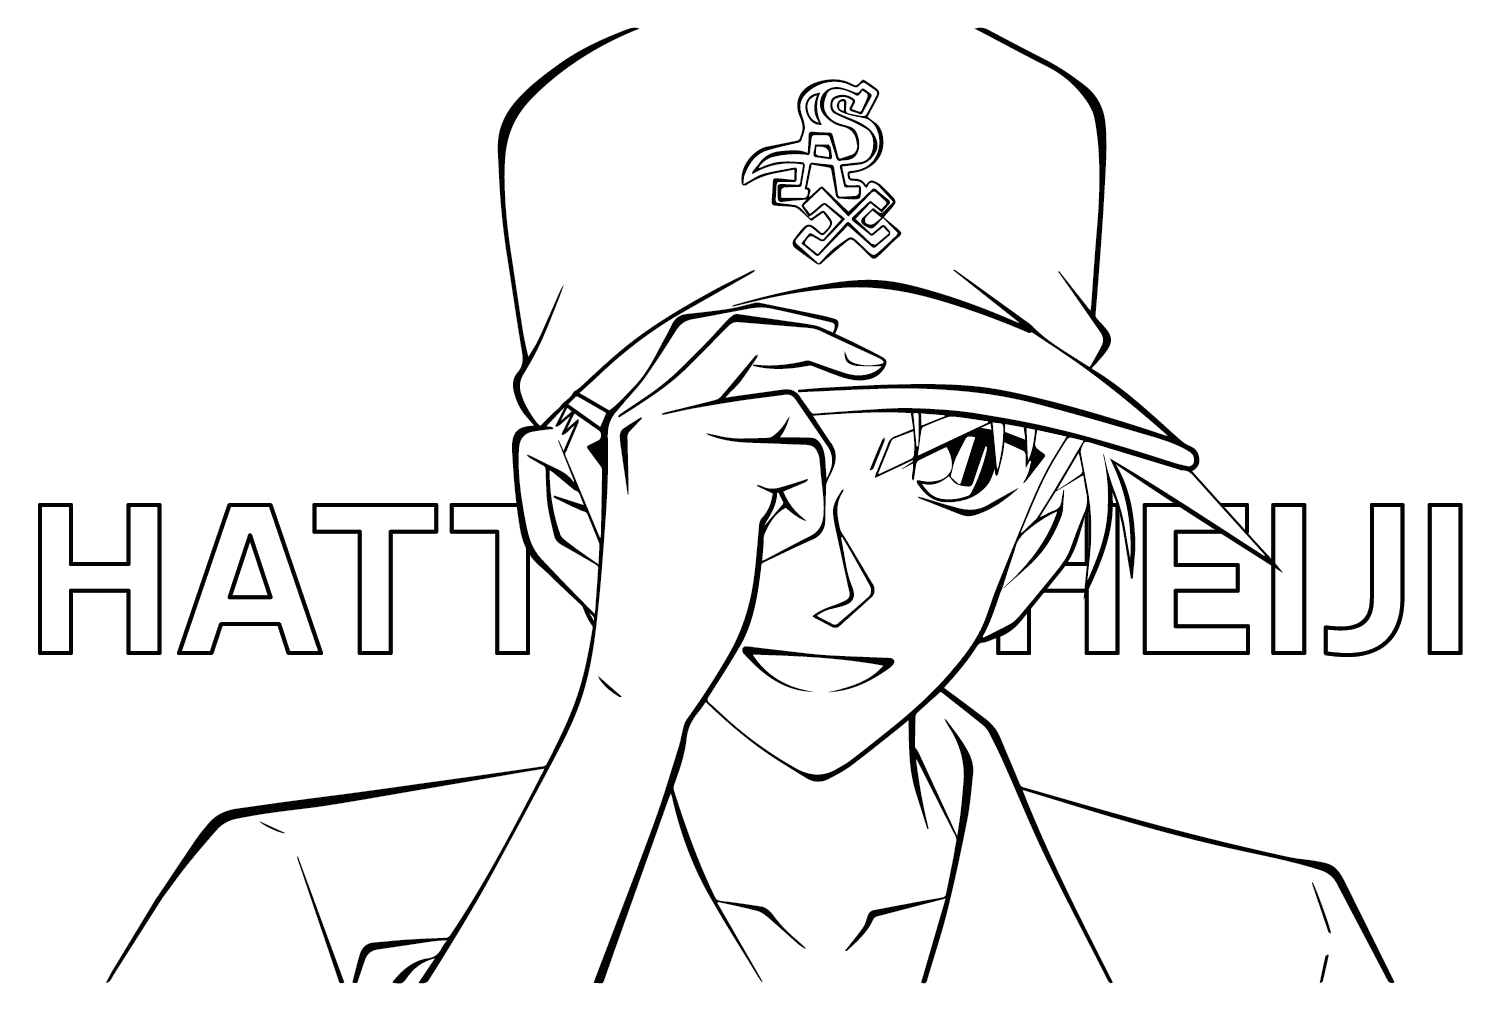 Hattori Heiji Coloring Pages to for Kids from Hattori Heiji